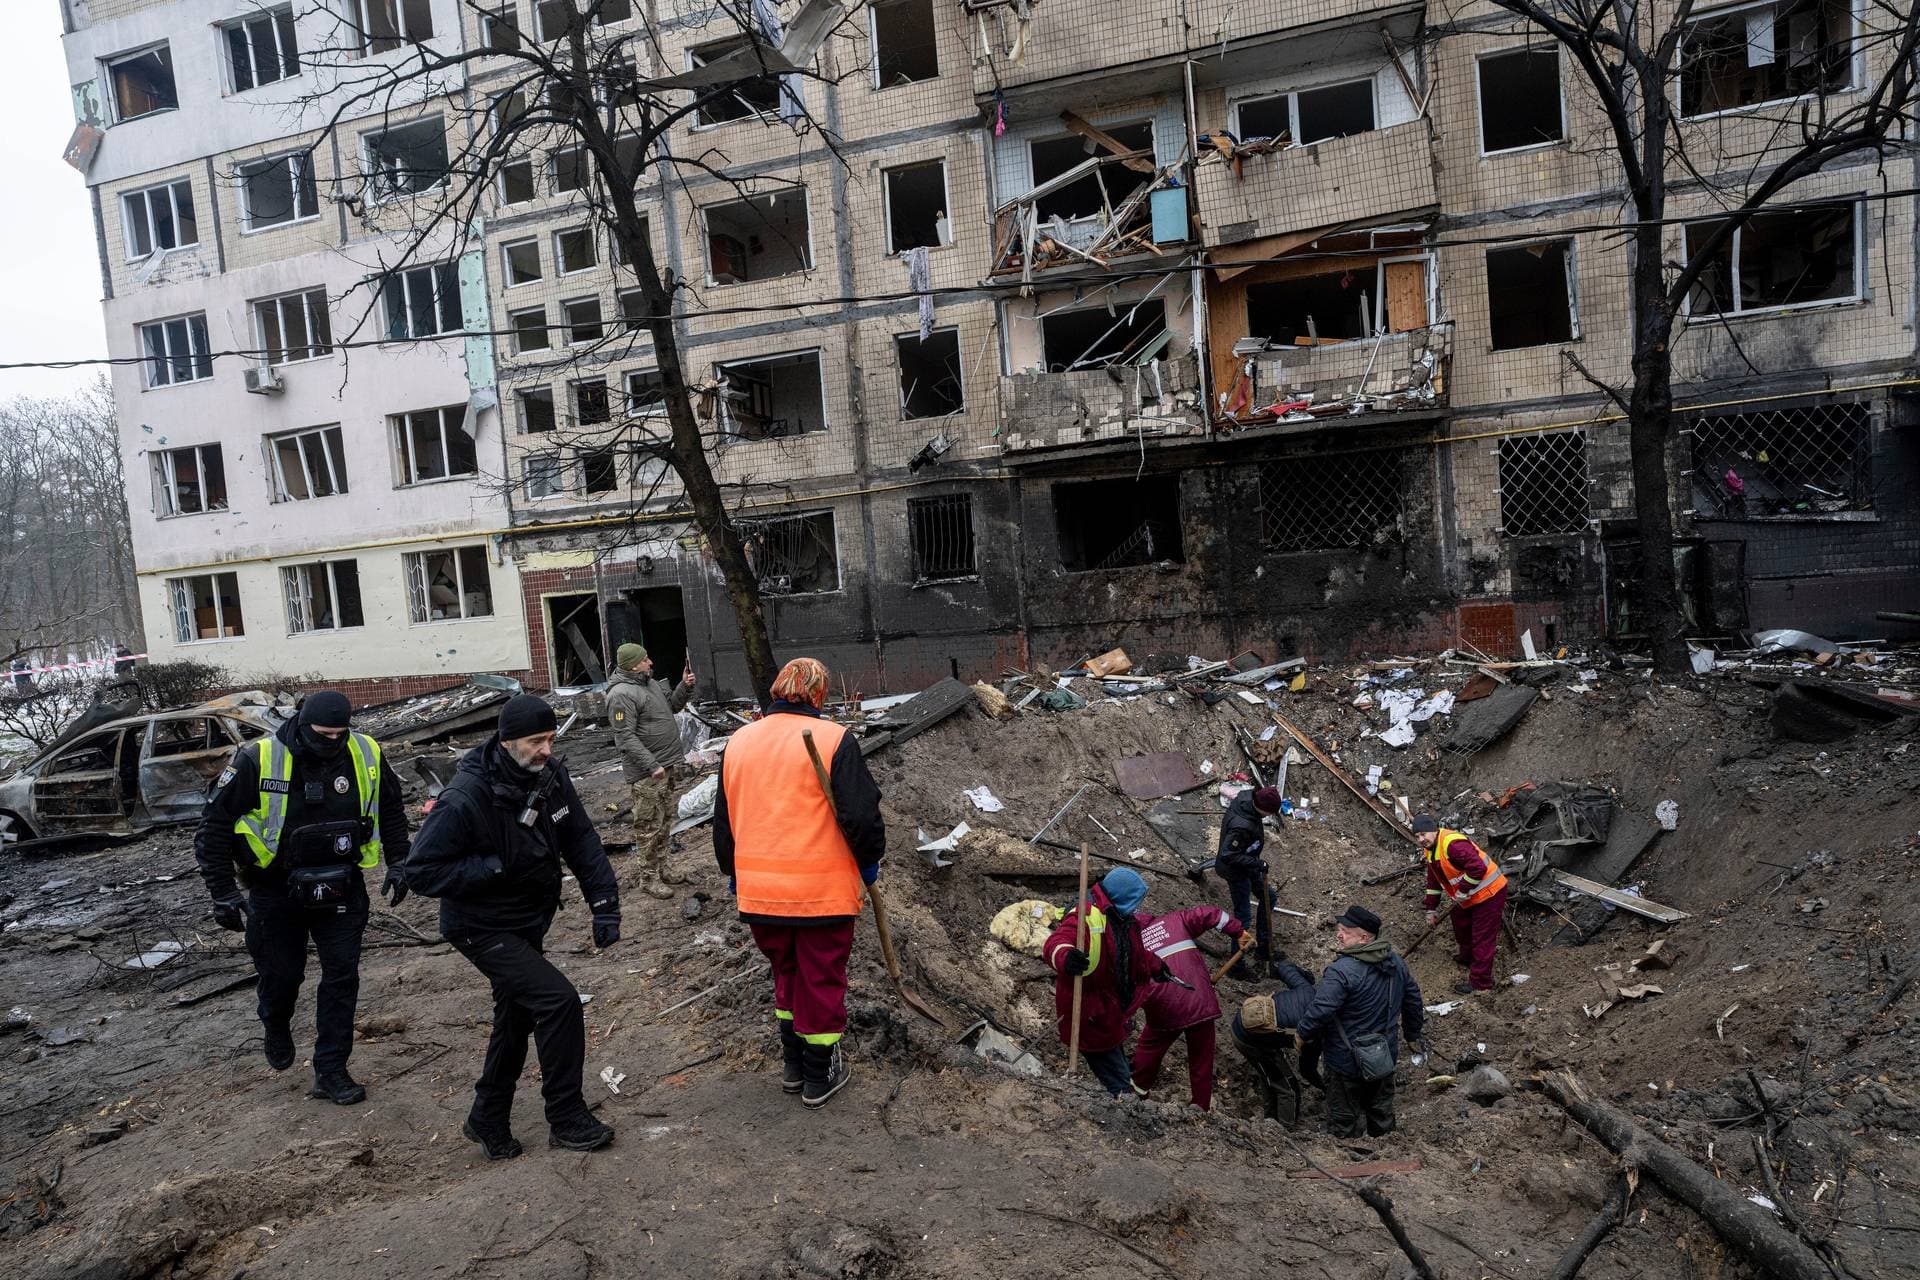 Investigators look for fragments of a rocket inside a crater after a Russian rocket attack at a residential neighbourhood in Kyiv